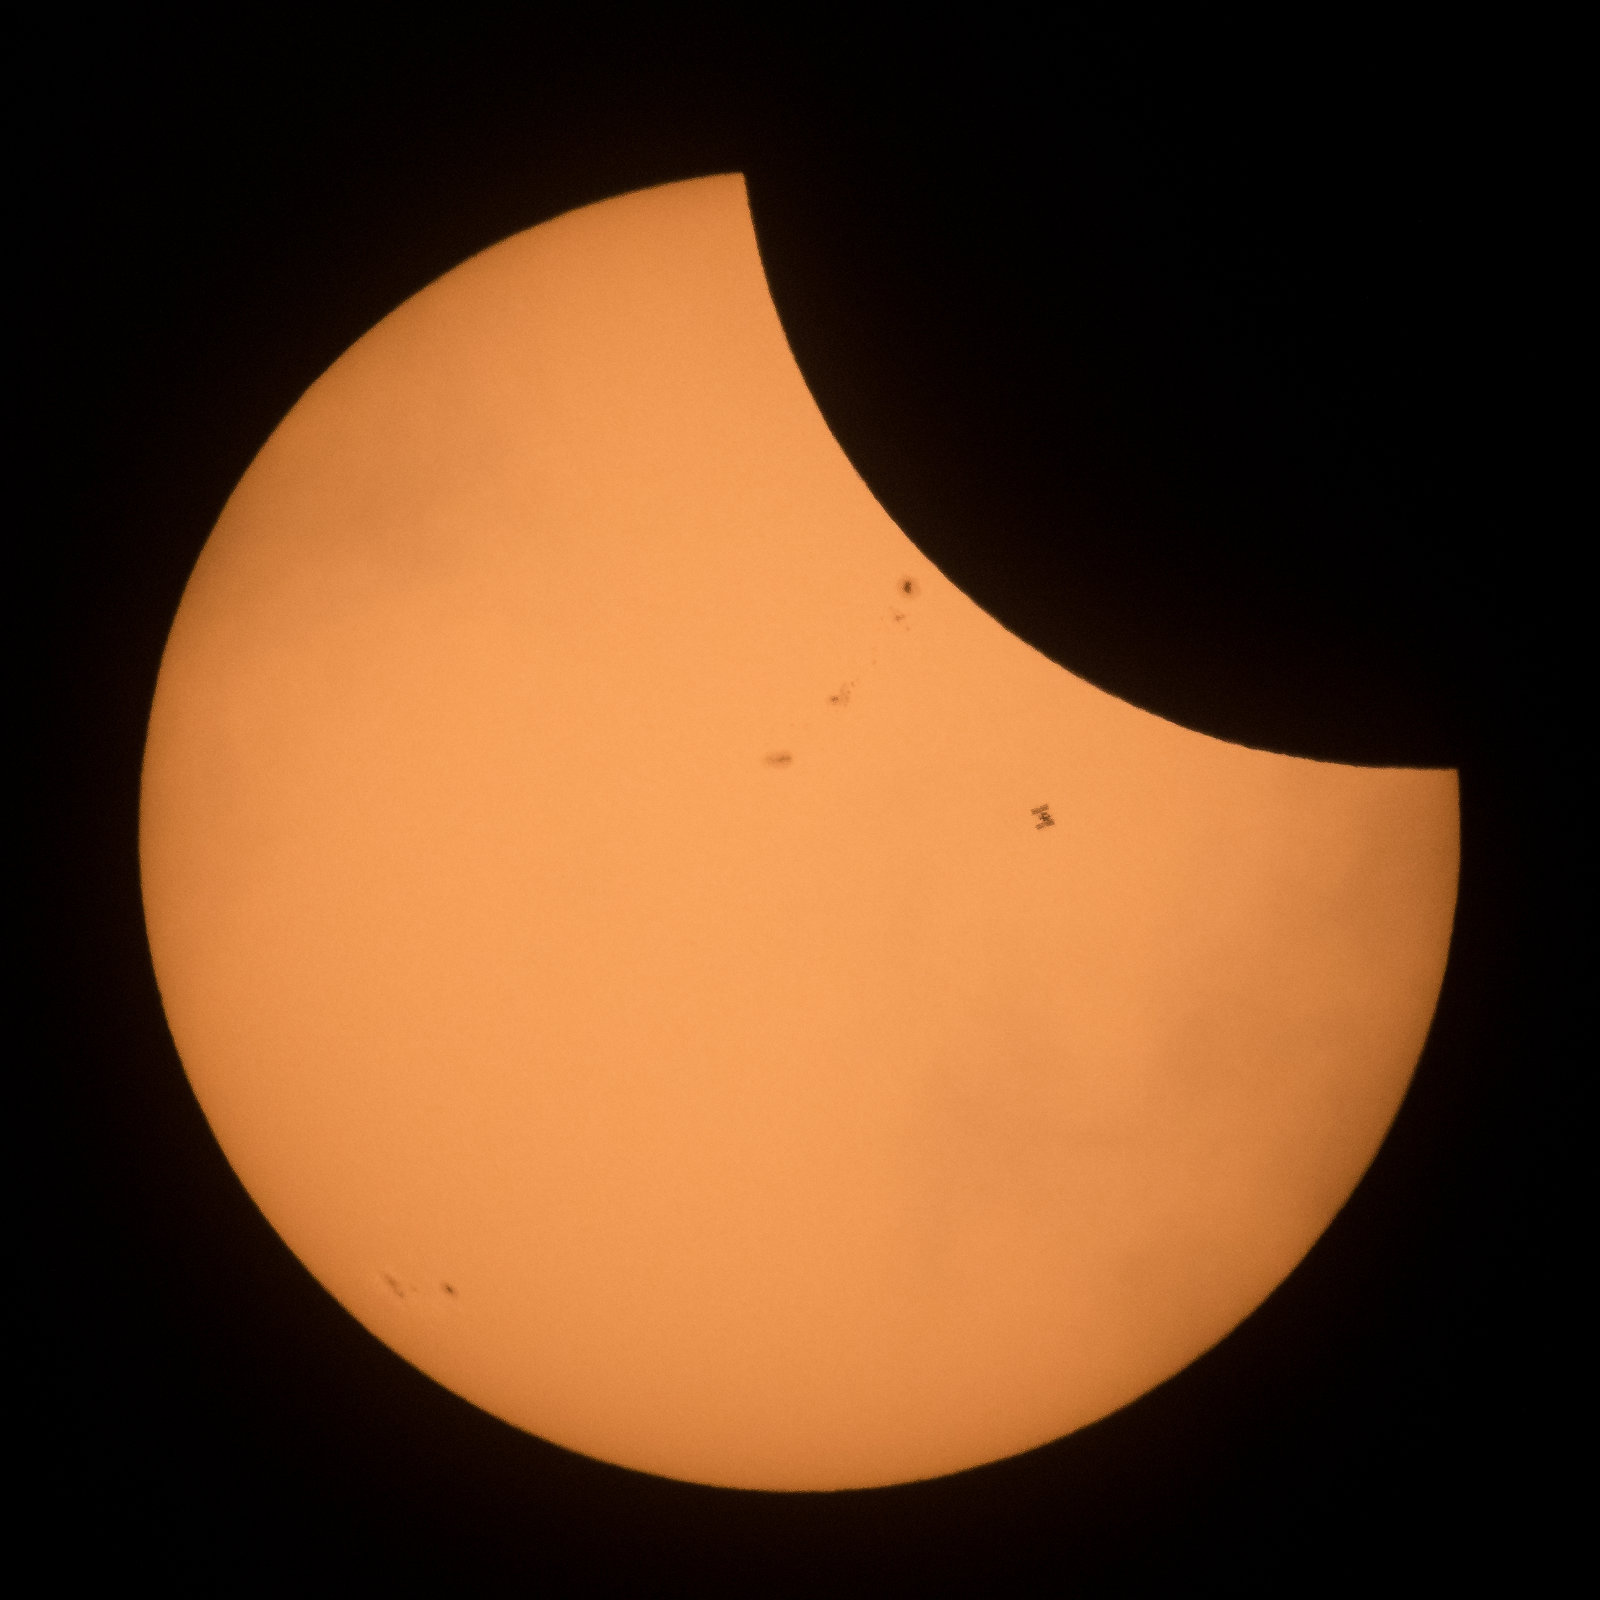 ISS in front of the partially eclipsed Sun